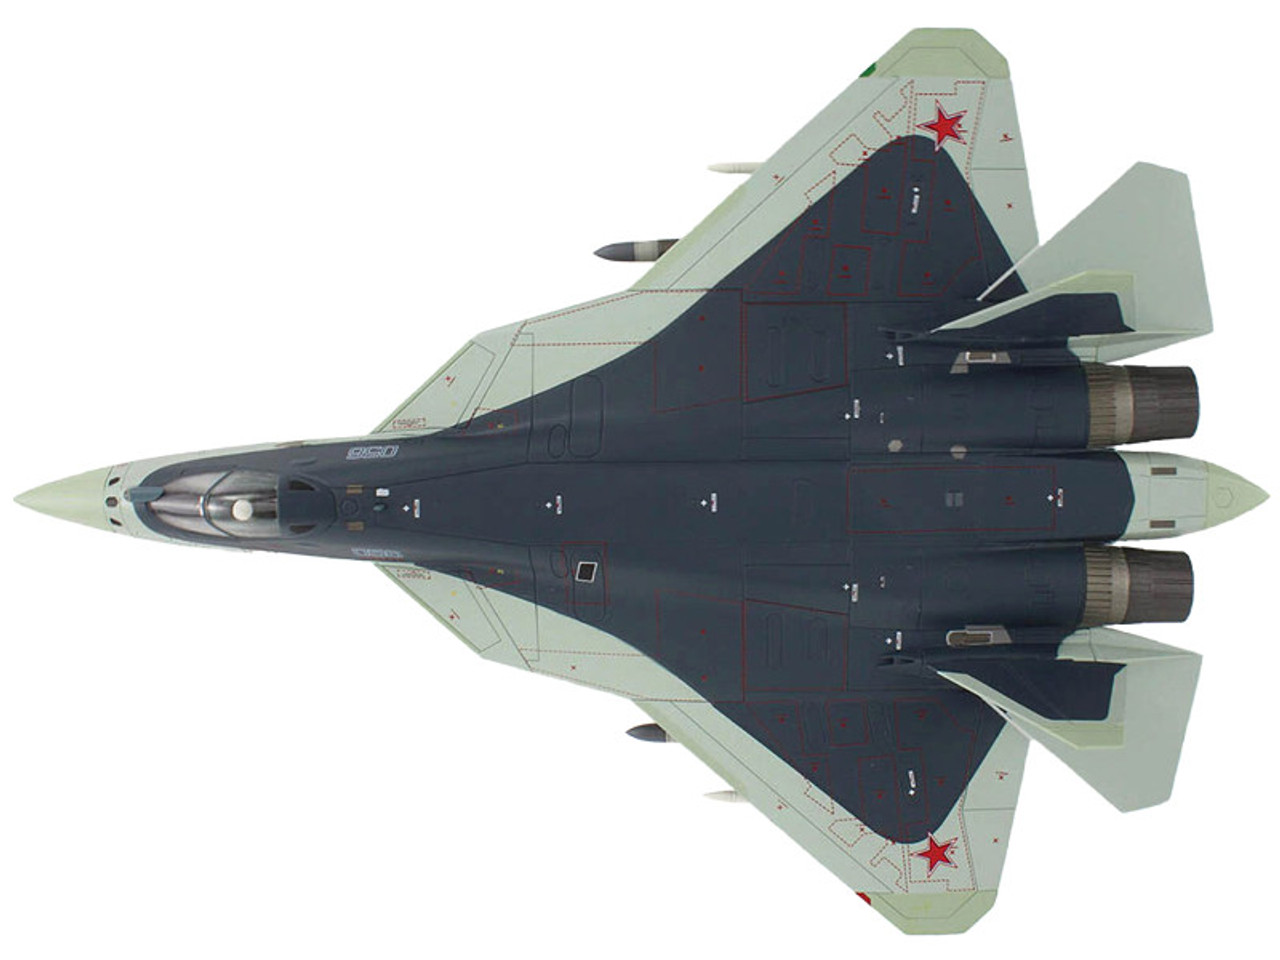 Sukhoi Su-57 Felon (T-50) Stealth Fighter Aircraft "Zhukovsky Airfield" (2023) Russian Air Force "Air Power Series" 1/72 Diecast Model by Hobby Master